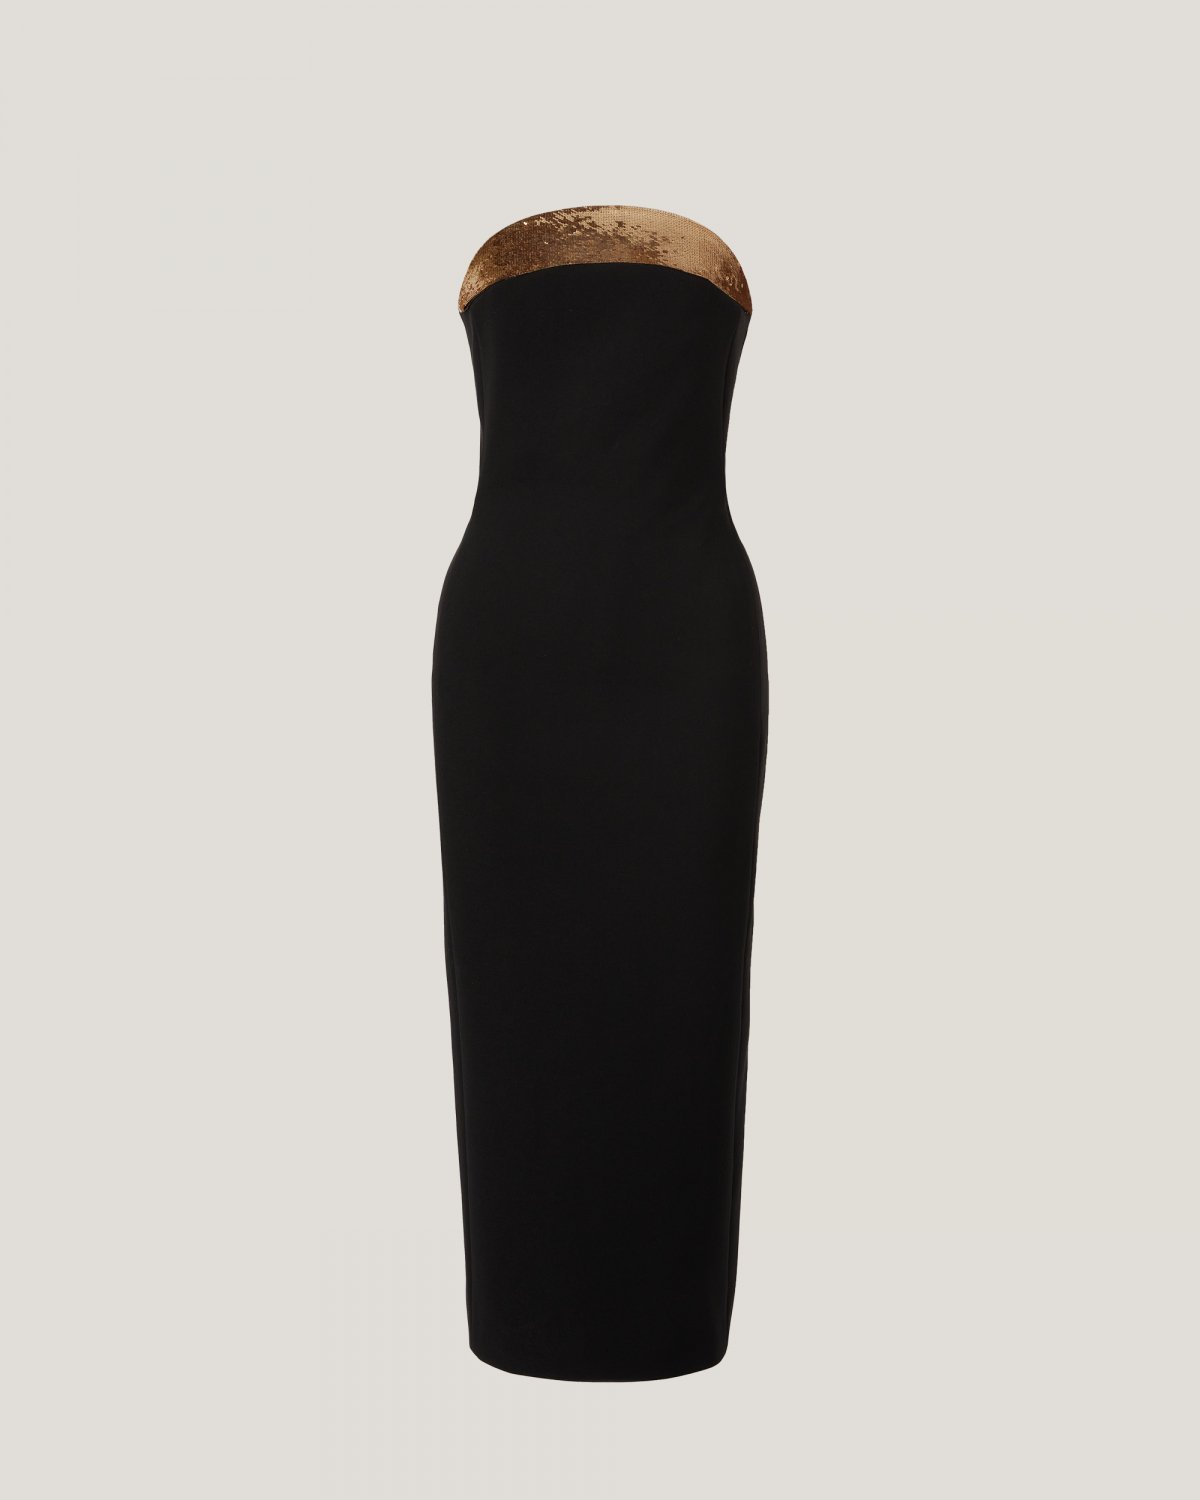 Cocktail black dress with embroidery | Spring Summer 2023 Collection, 73_74, Cruise 2023 Collection, Mid season sale -30%, Summer Sale, Evening Essential | Genny